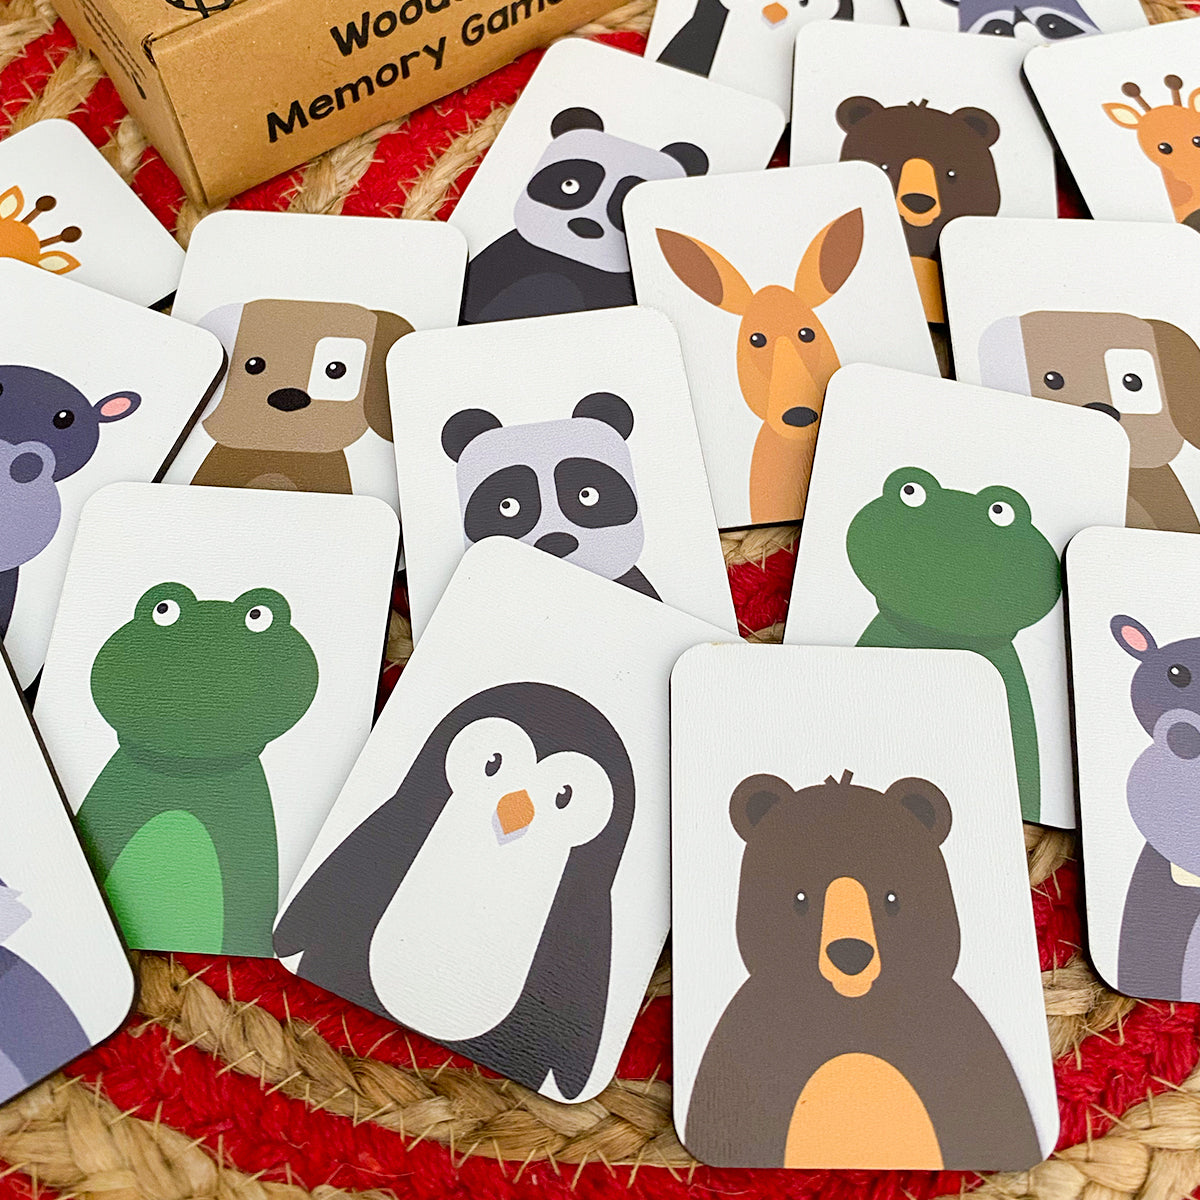 Animals Wooden Memory Game for Kids